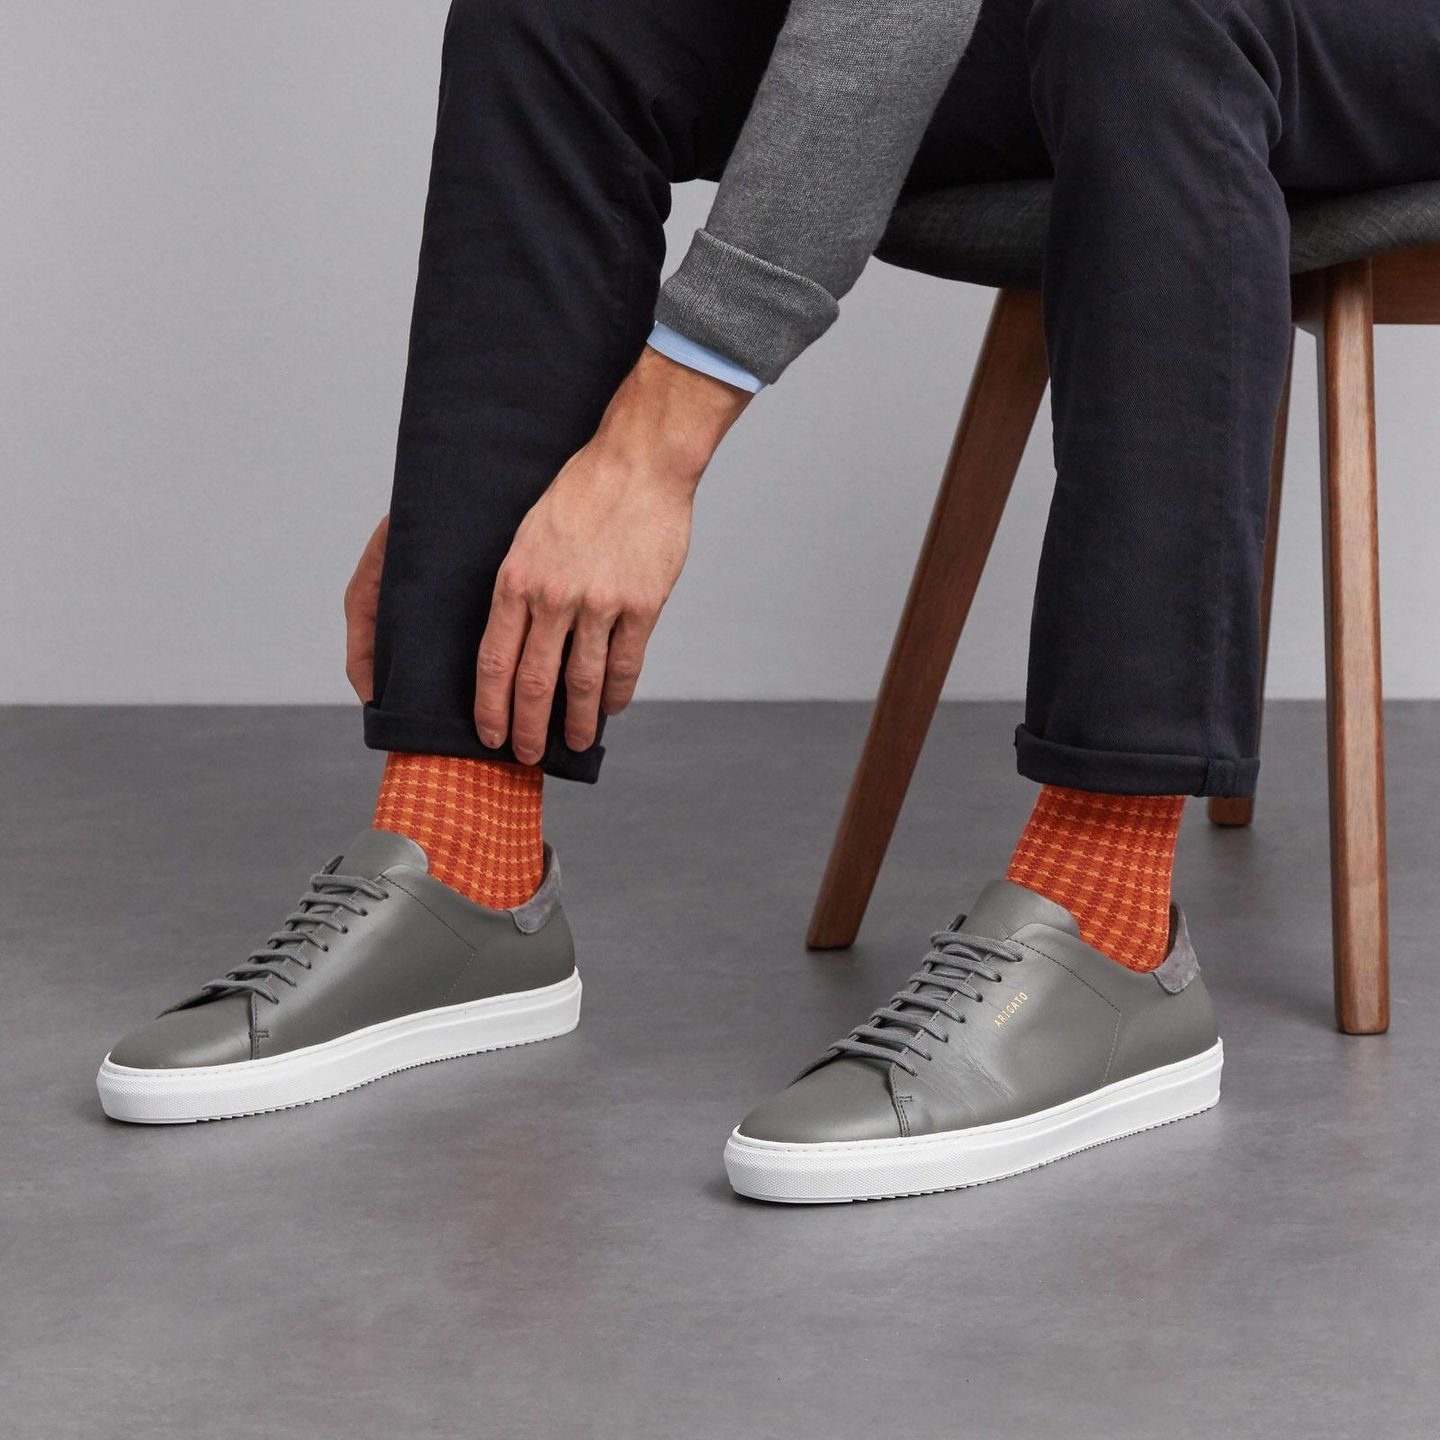 Man sitting and touching the cuff of his trousers wearing orange chequered socks